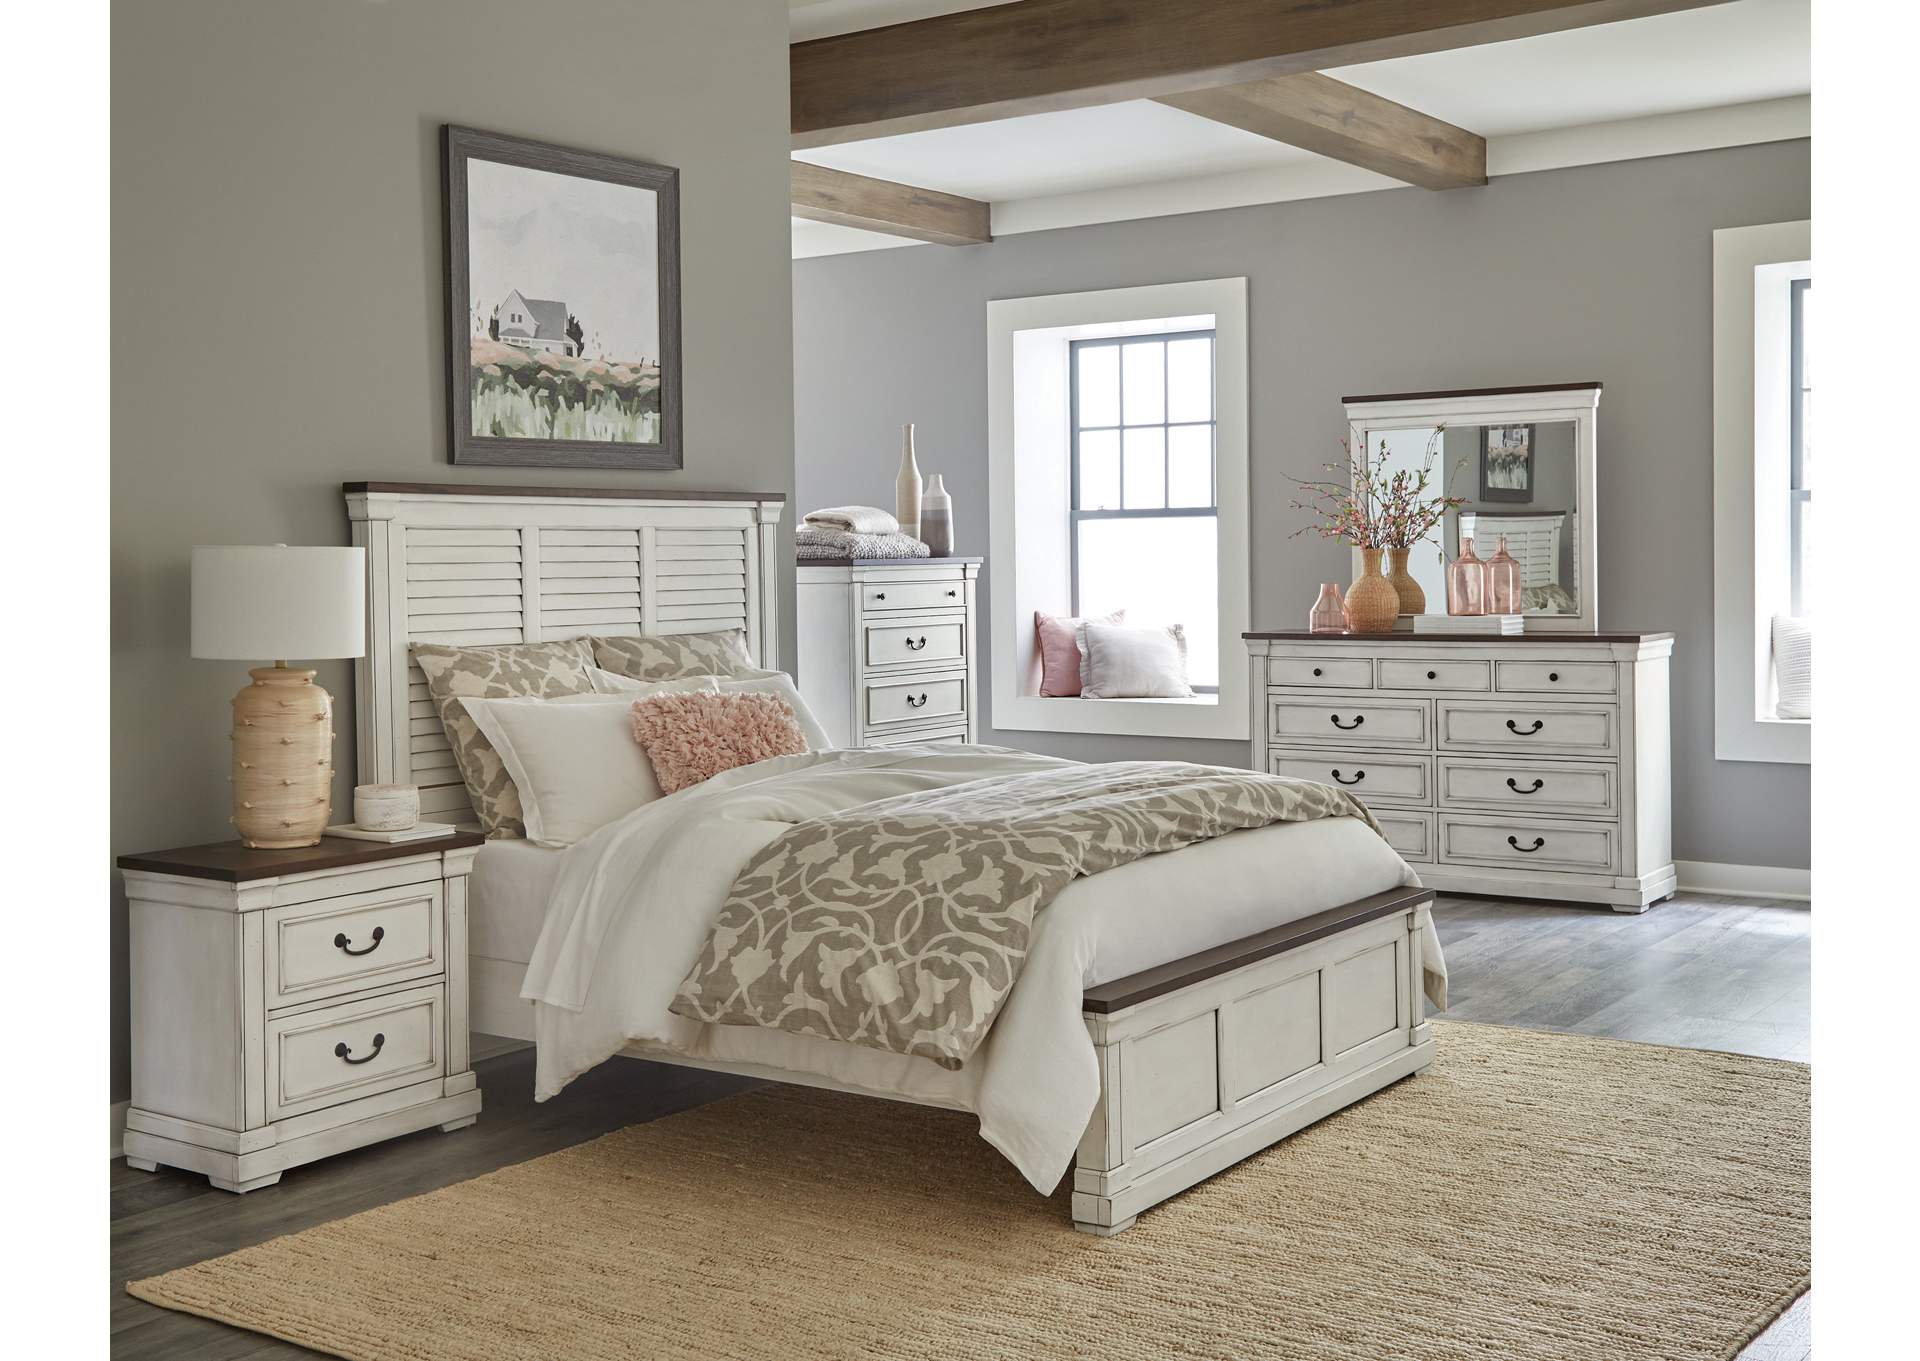 Eastern King Bed 4 Piece Set Mid, Eastern King Bed